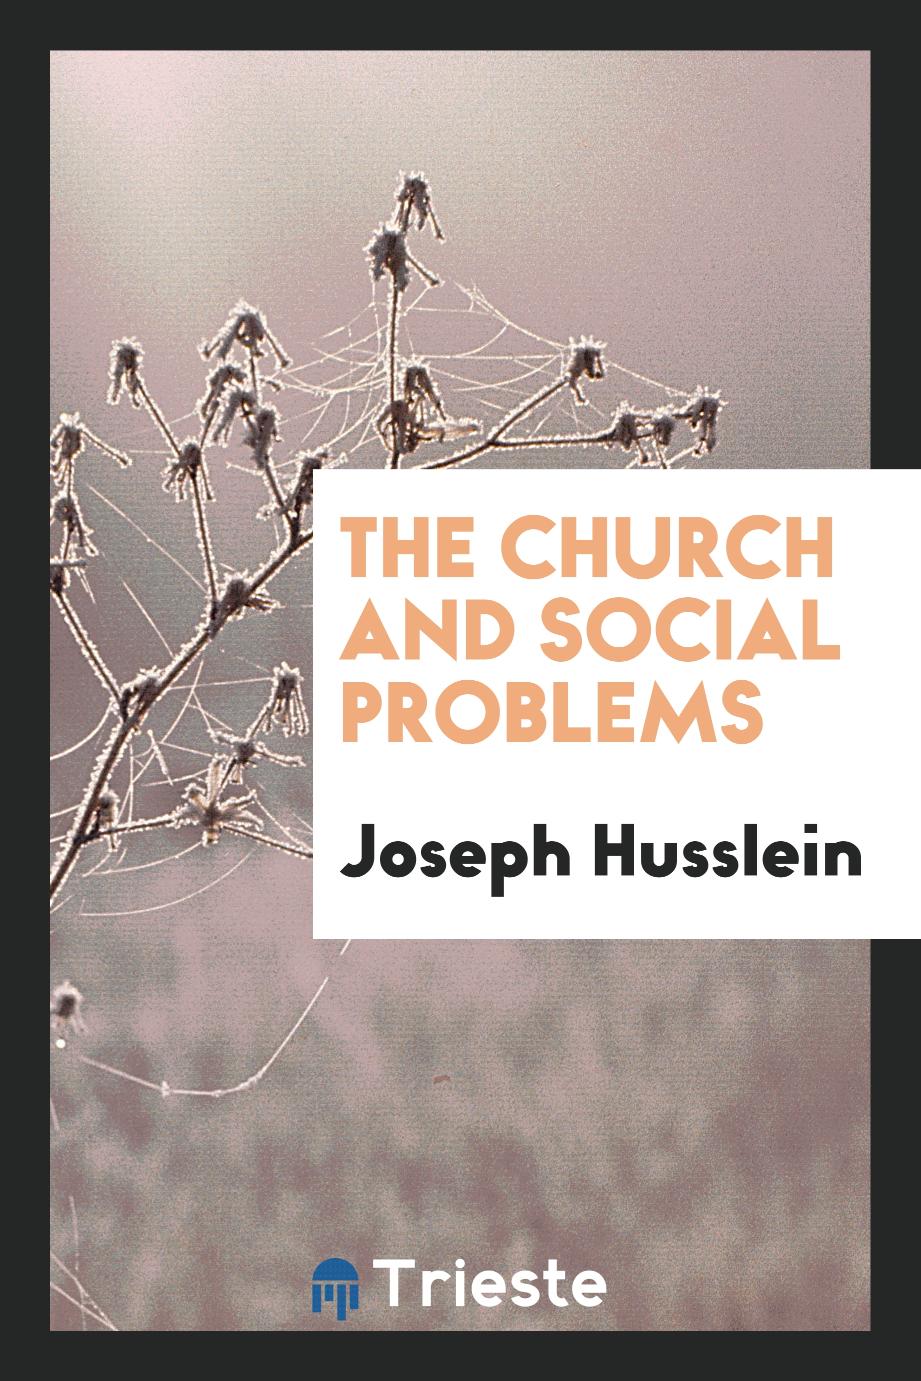 The Church and social problems